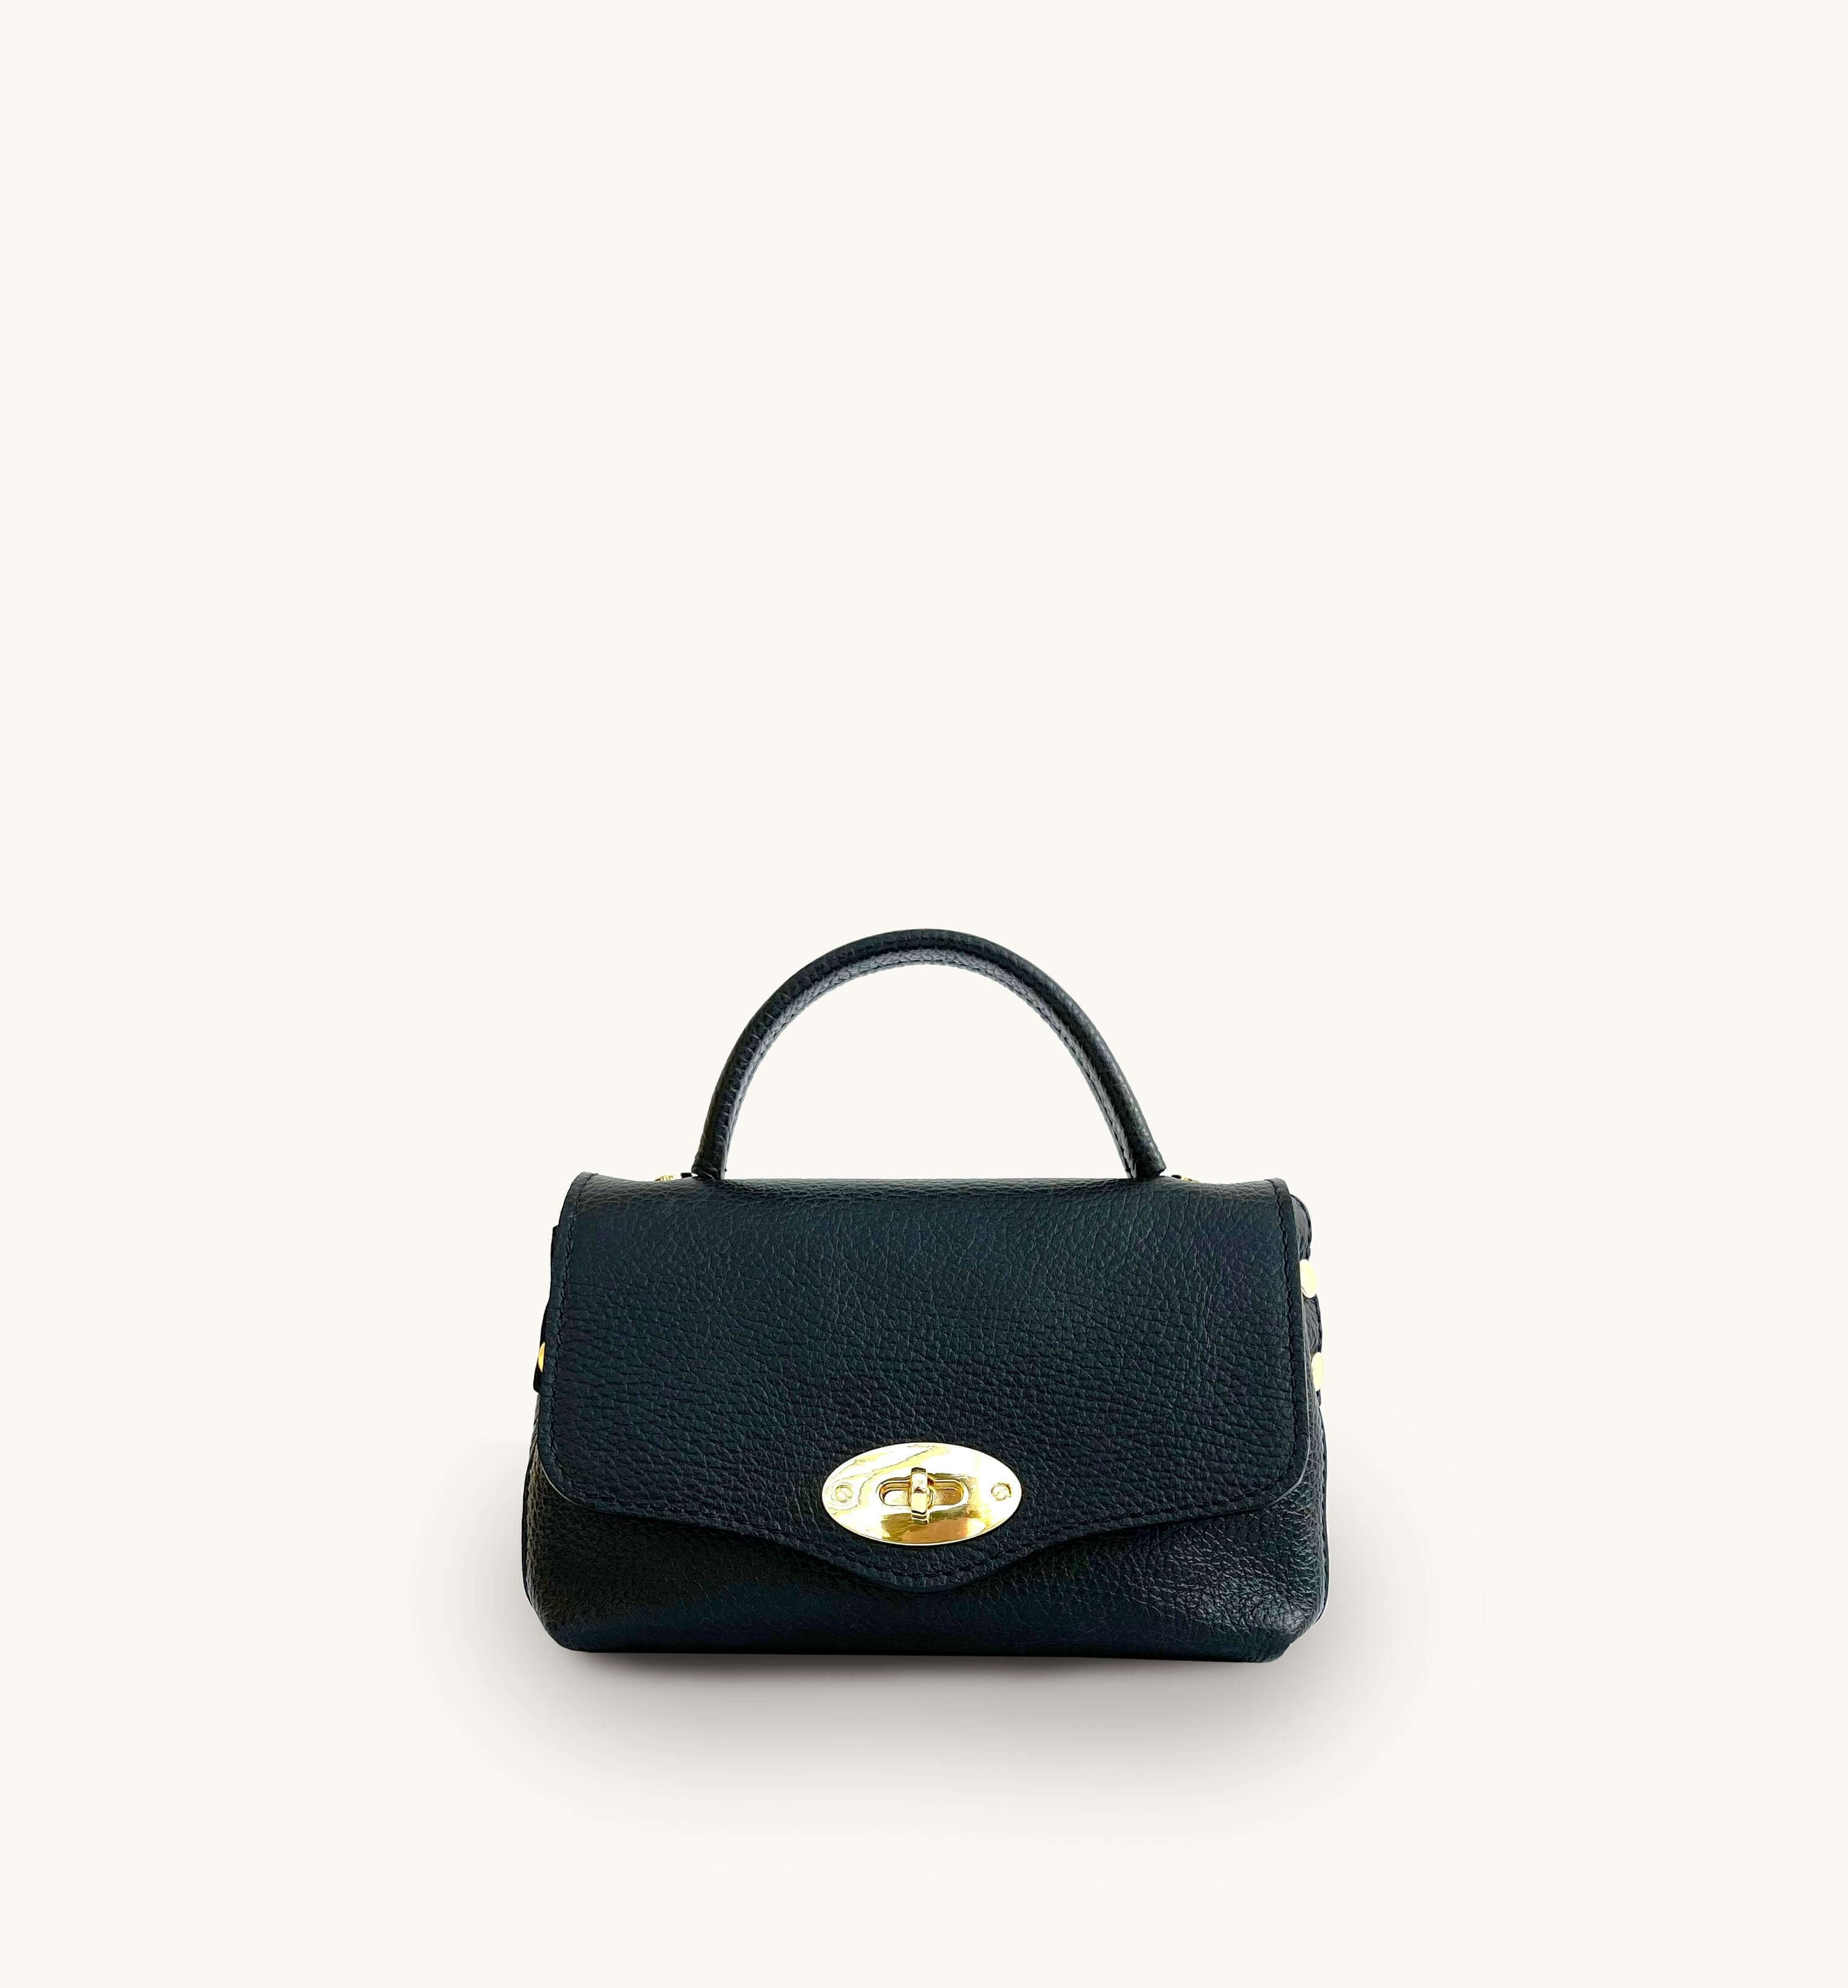 Apatchy The Rachel Black Leather Bag